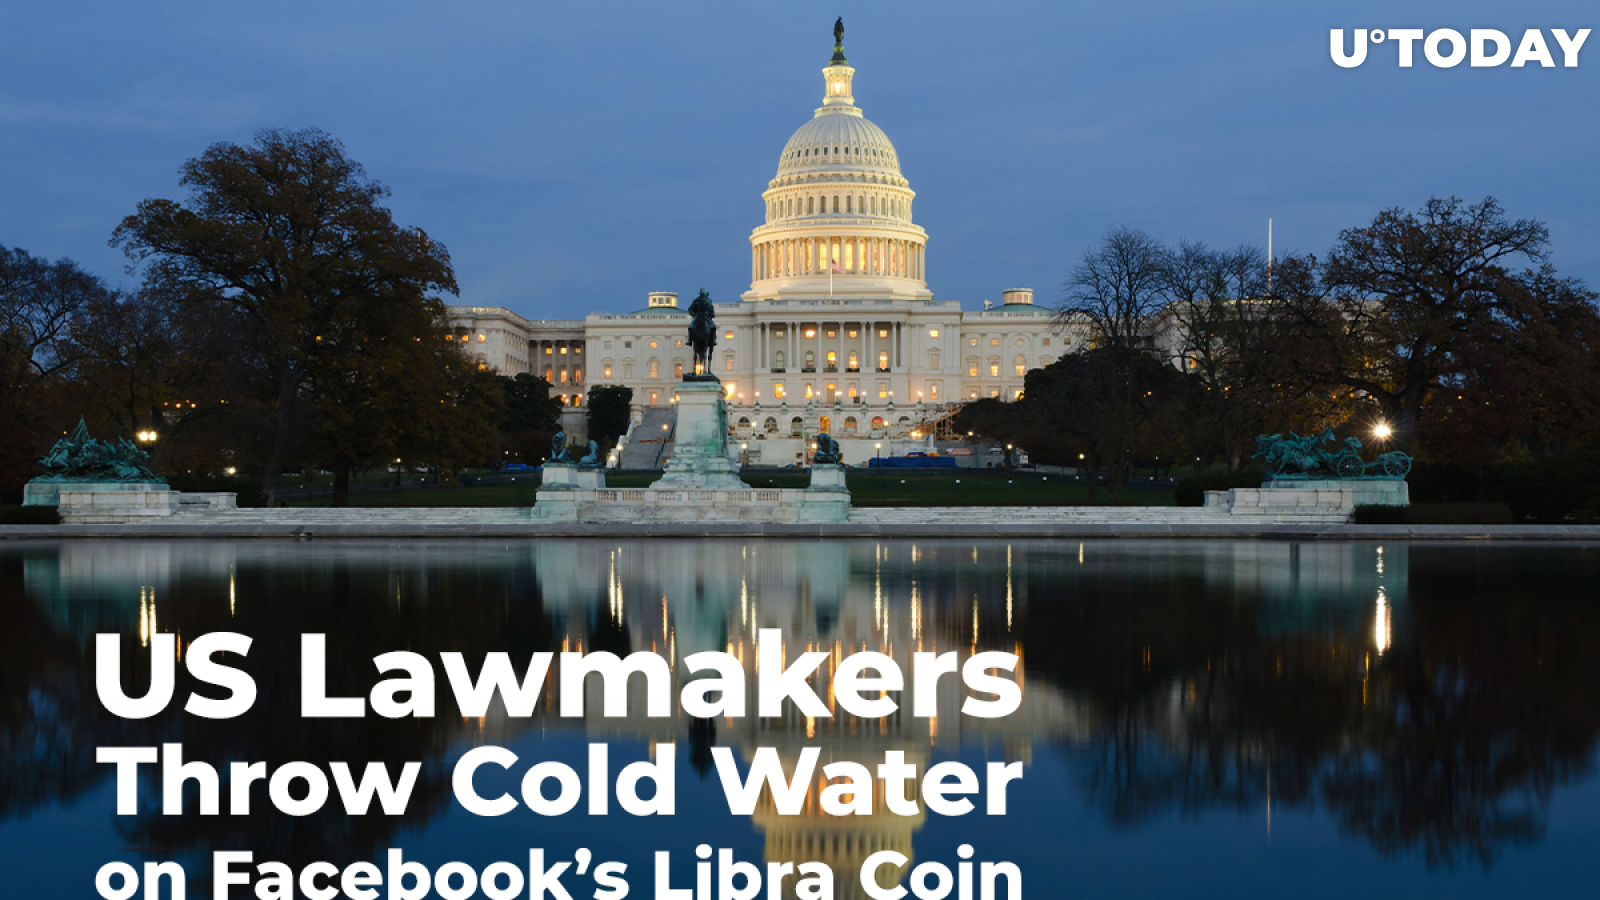 US Lawmakers Throw Cold Water on Facebook’s Libra Coin